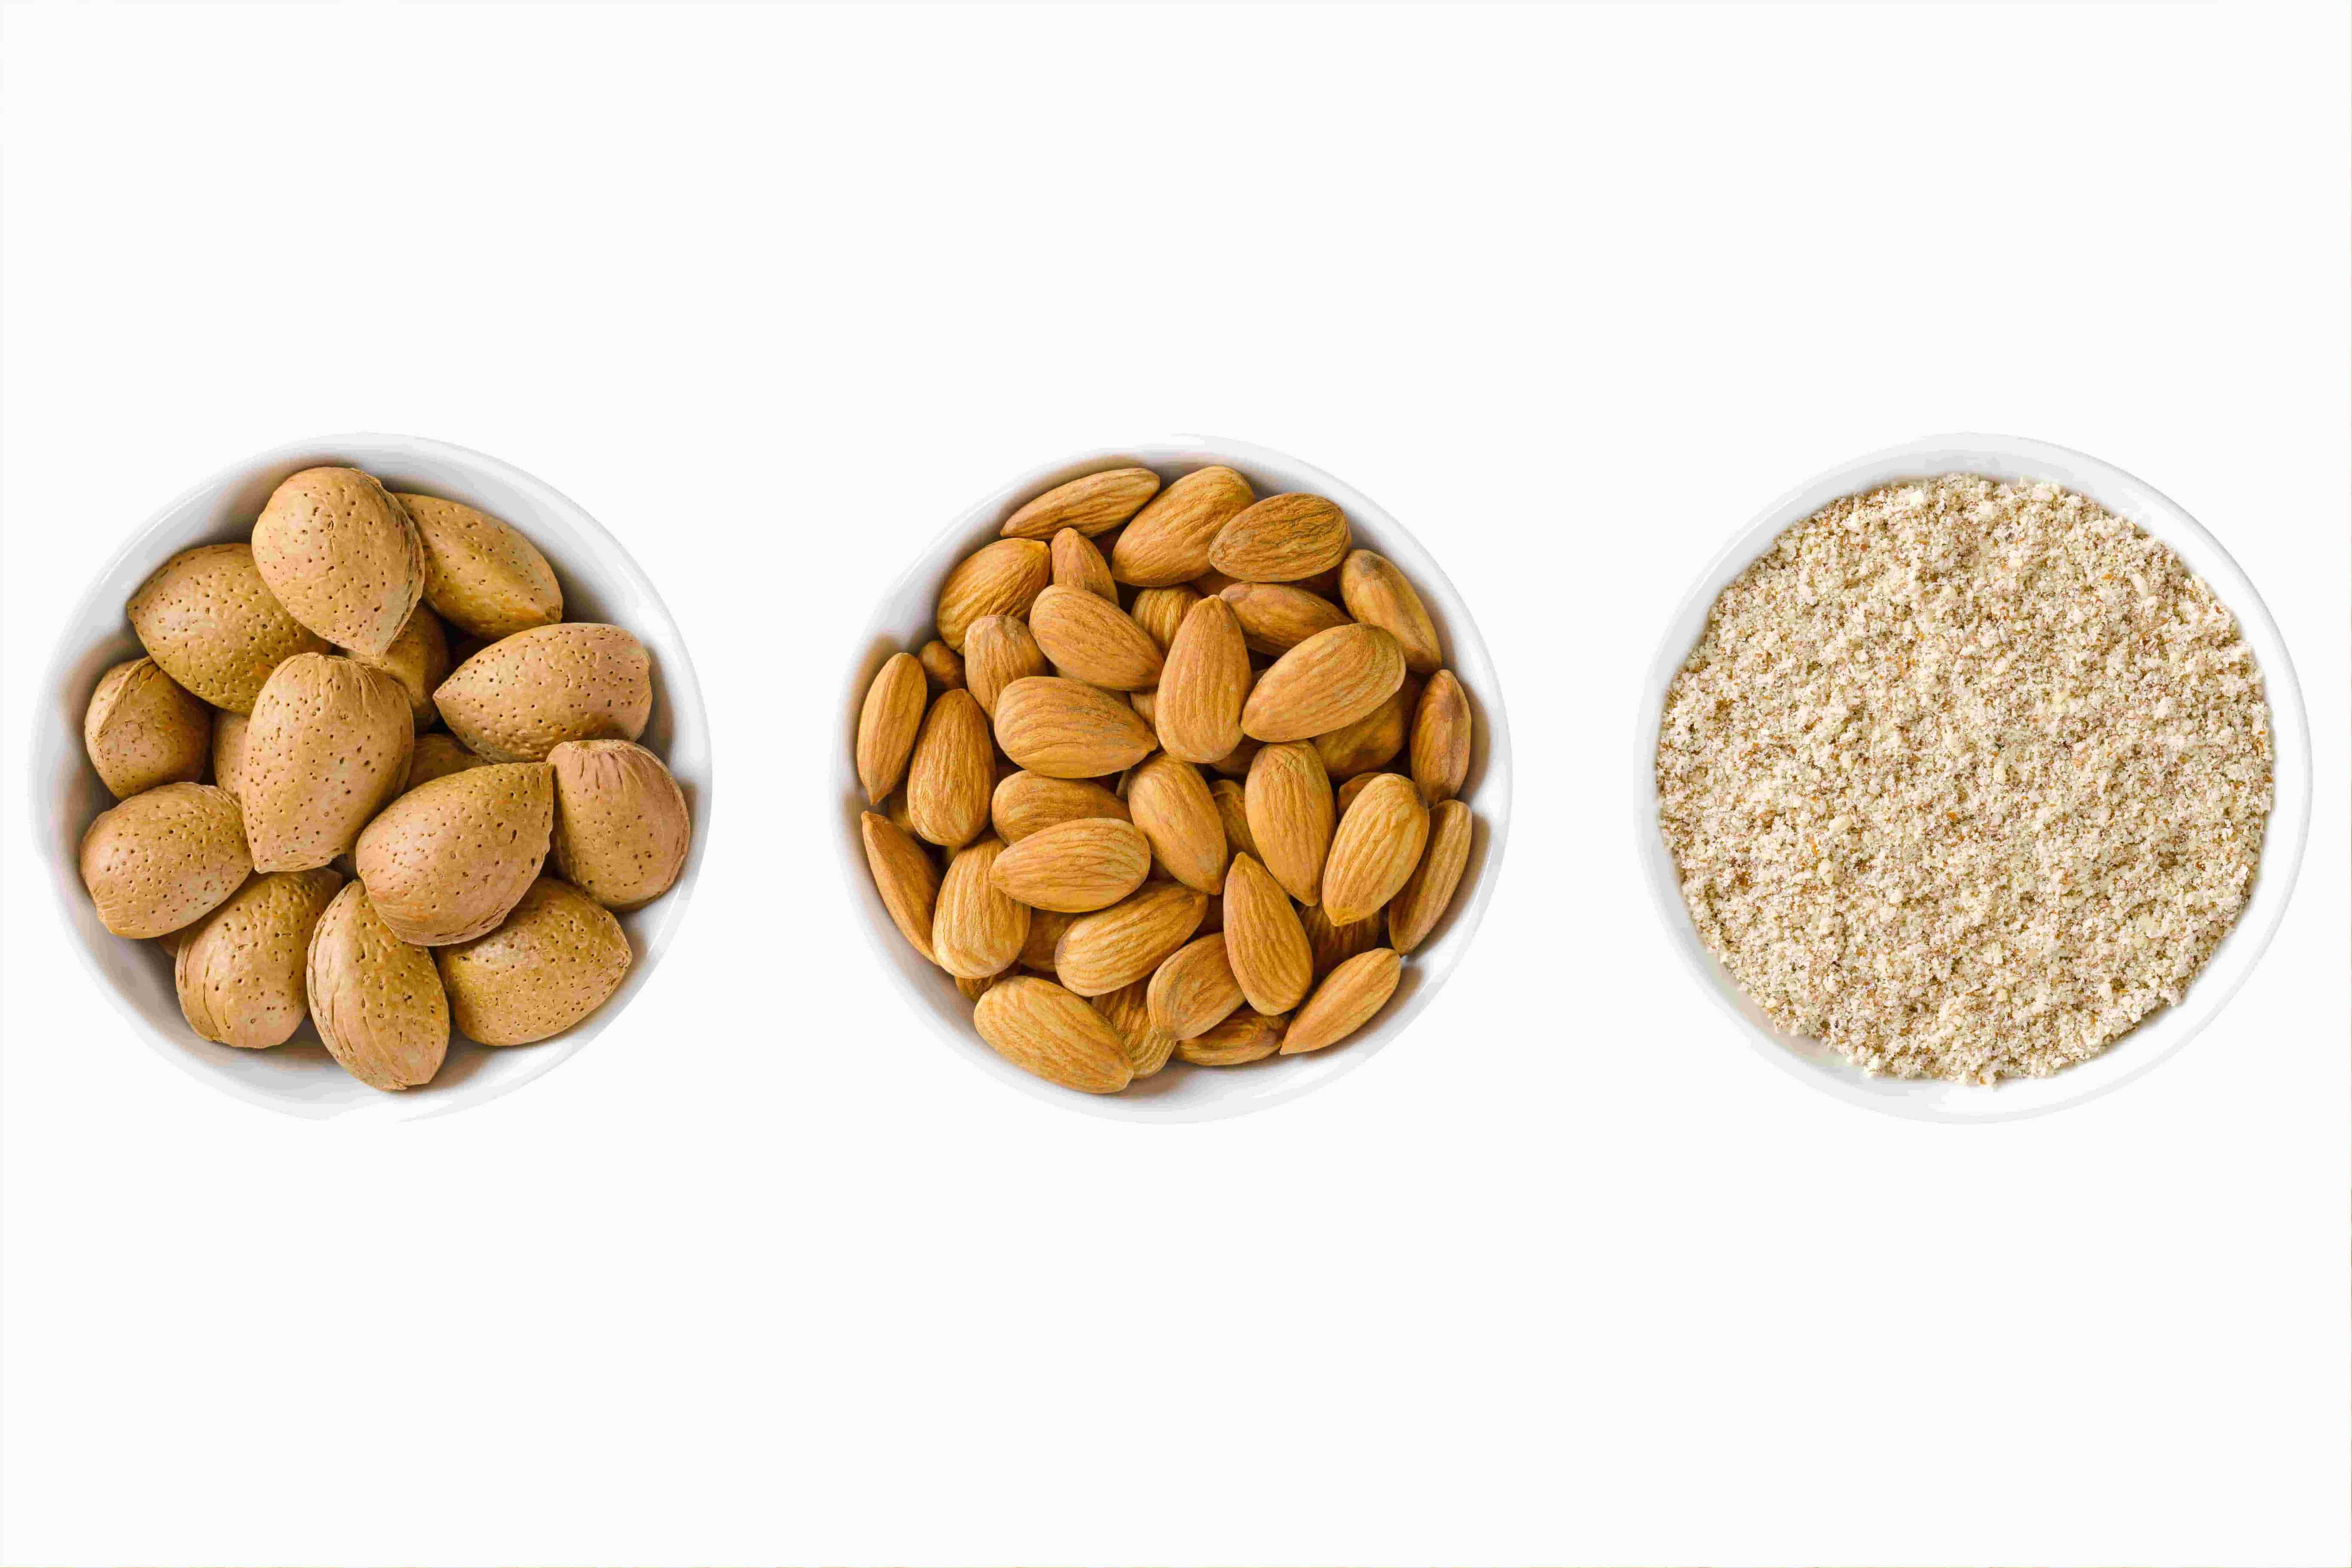 Nut flour: new applications in the food industry